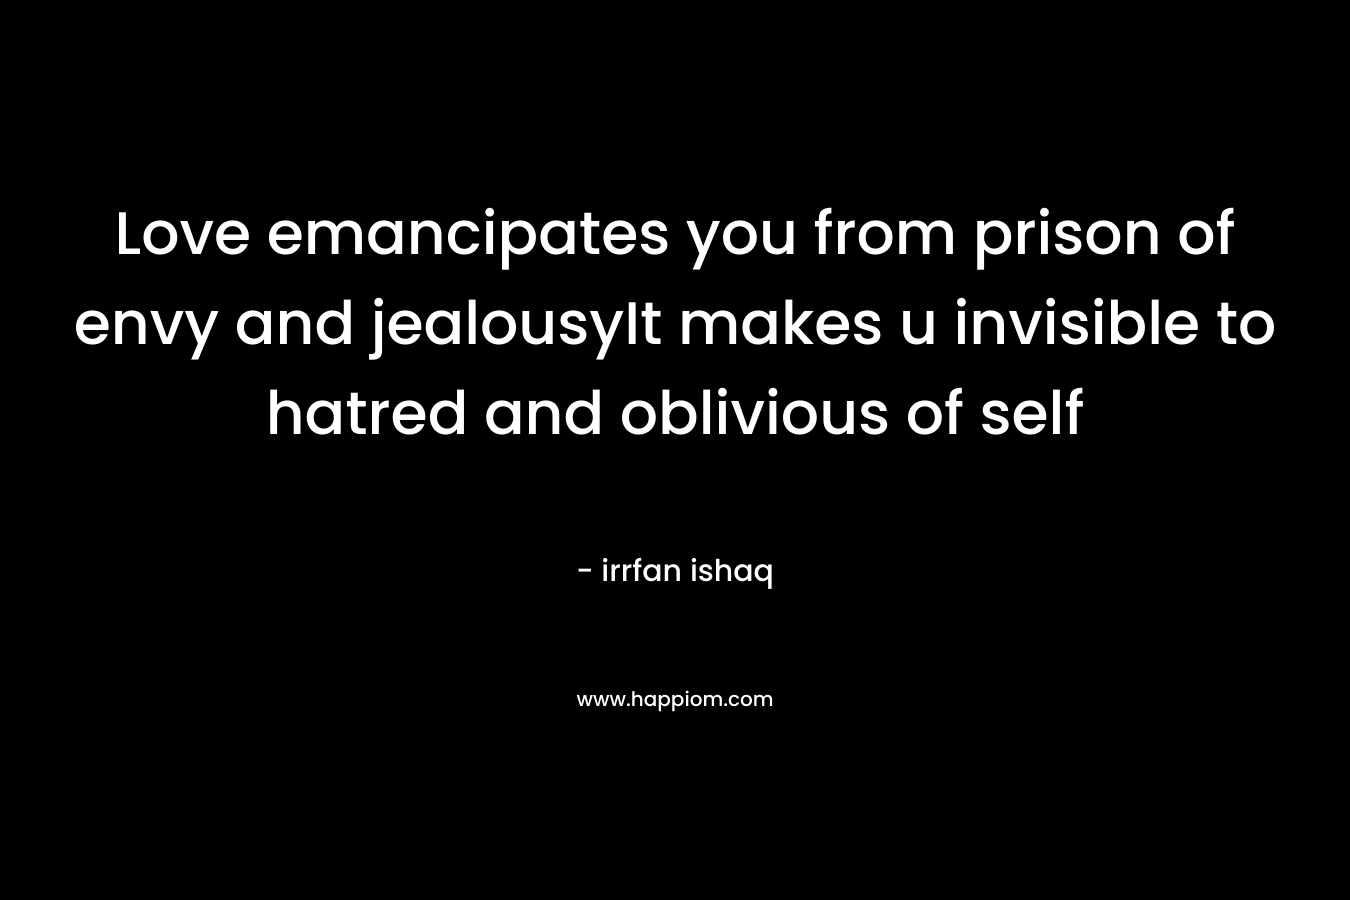 Love emancipates you from prison of envy and jealousyIt makes u invisible to hatred and oblivious of self – irrfan ishaq